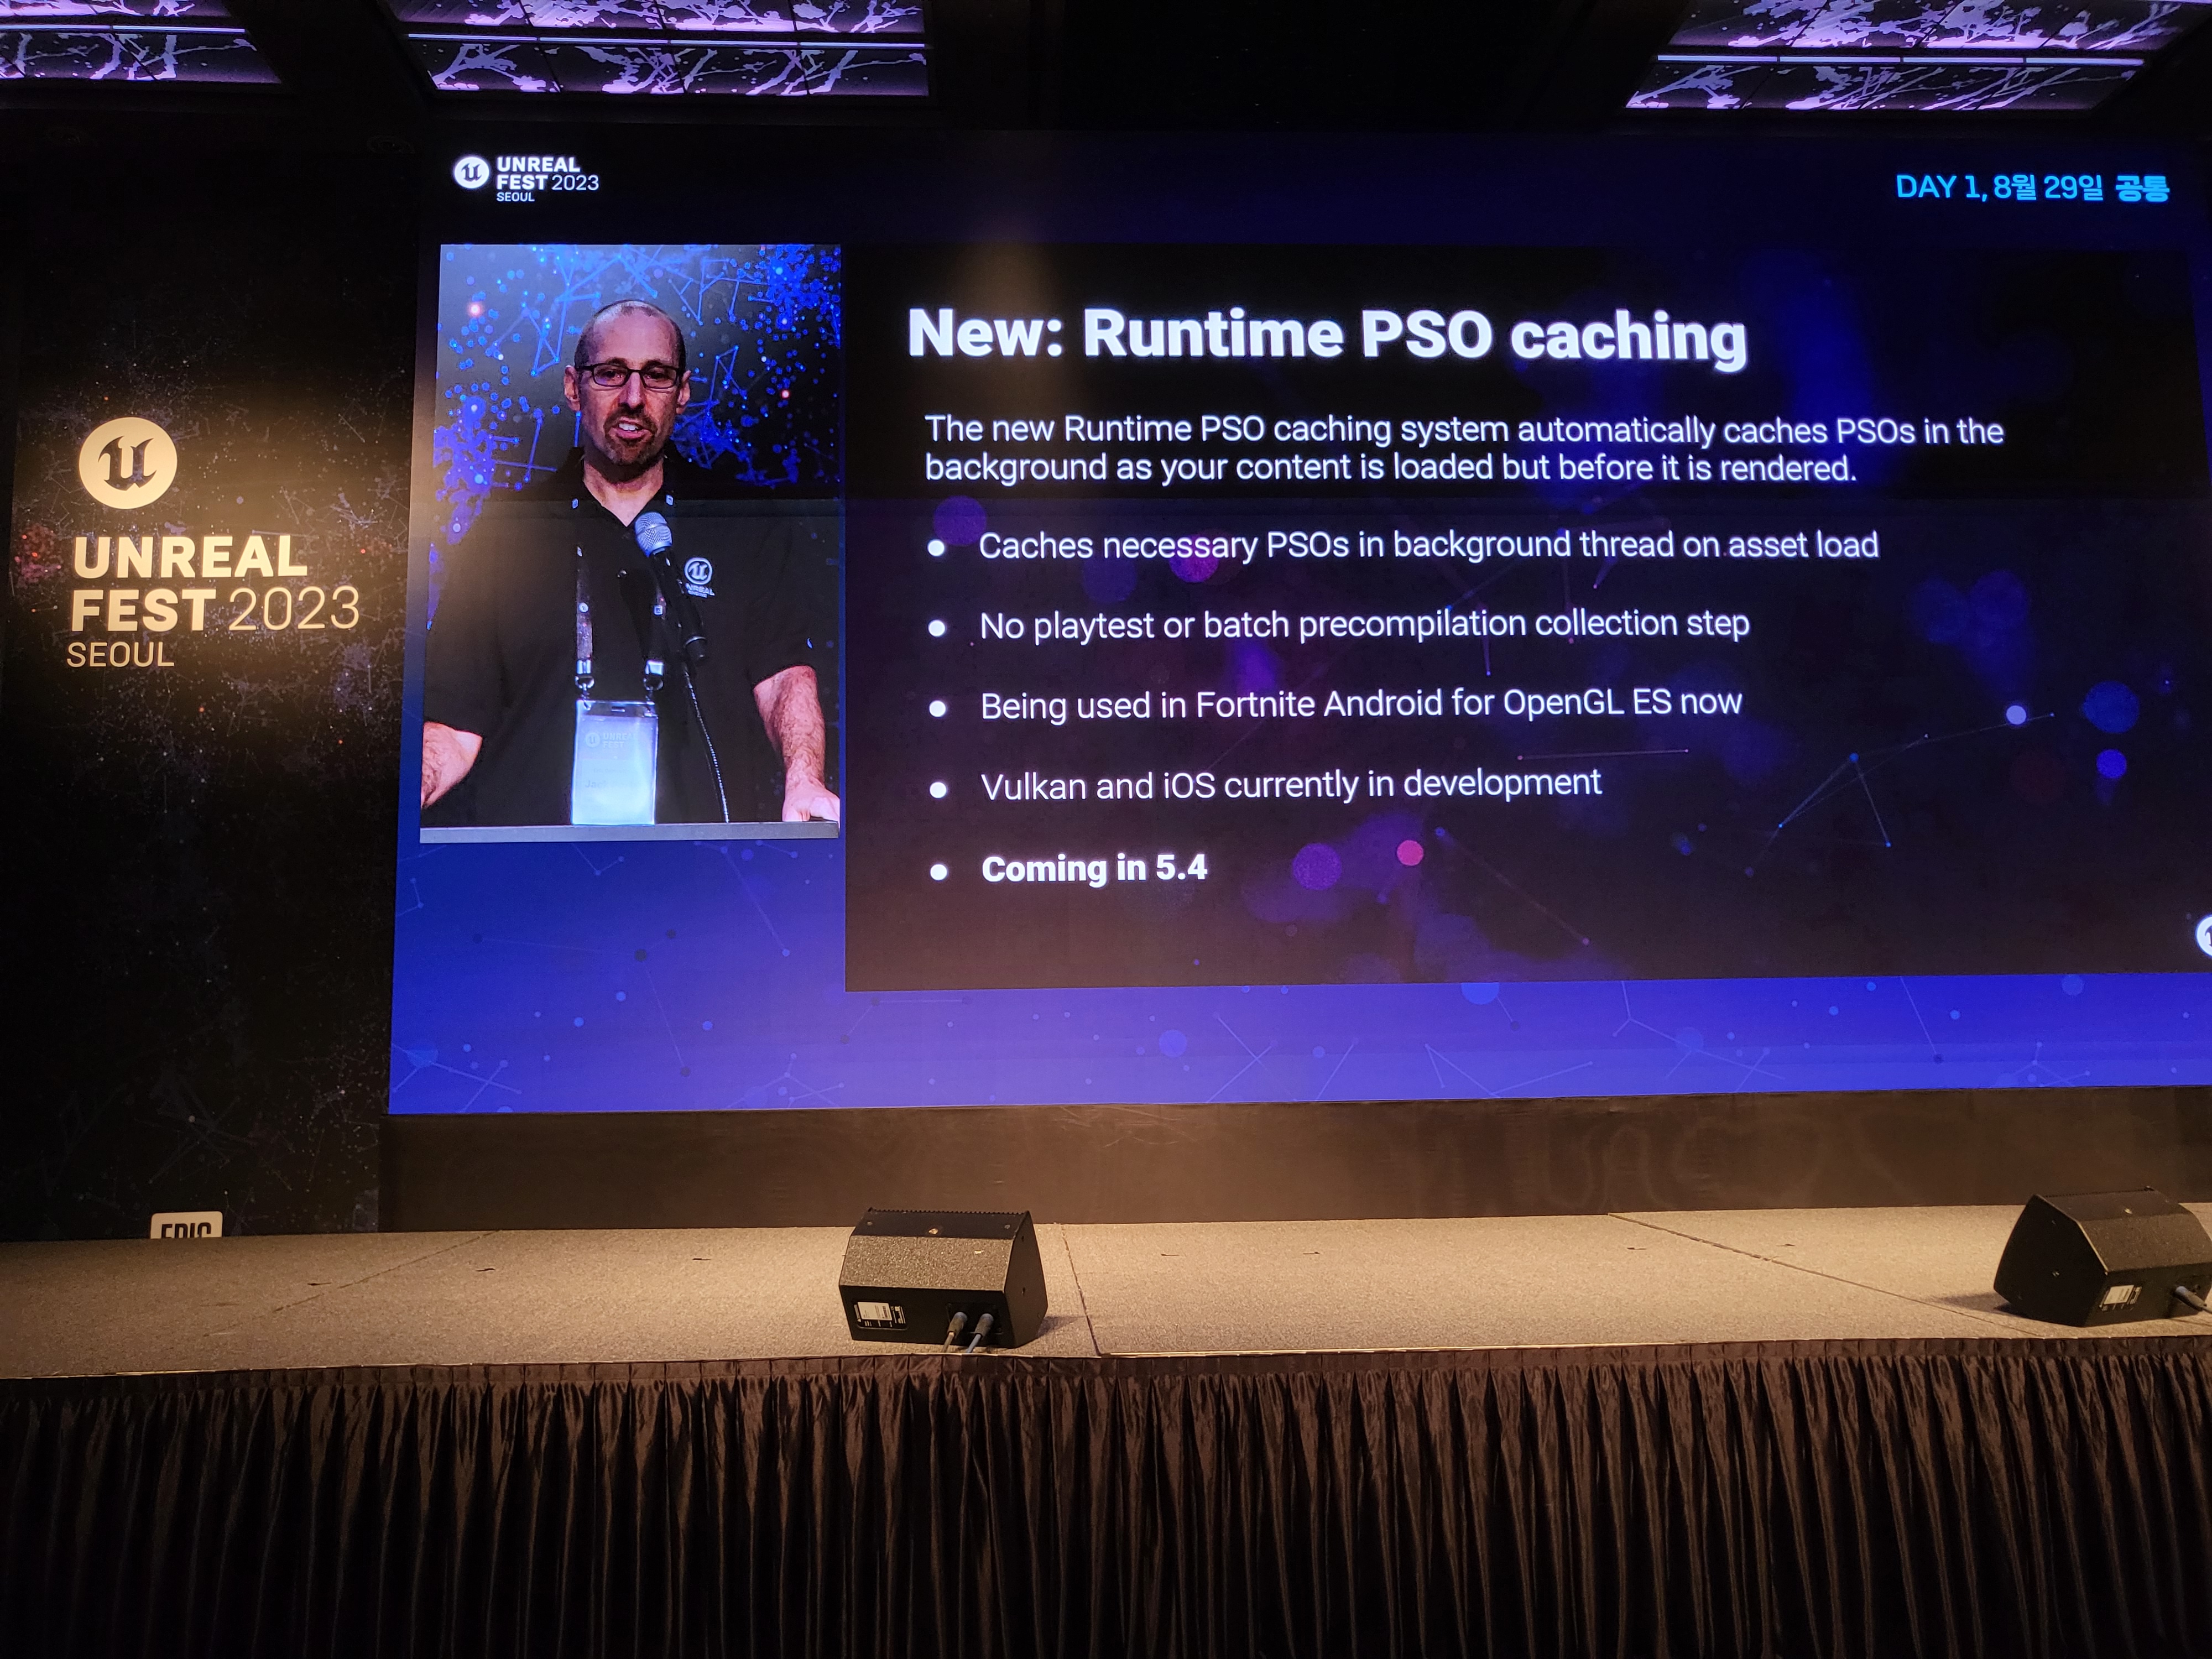 Runtime PSO caching